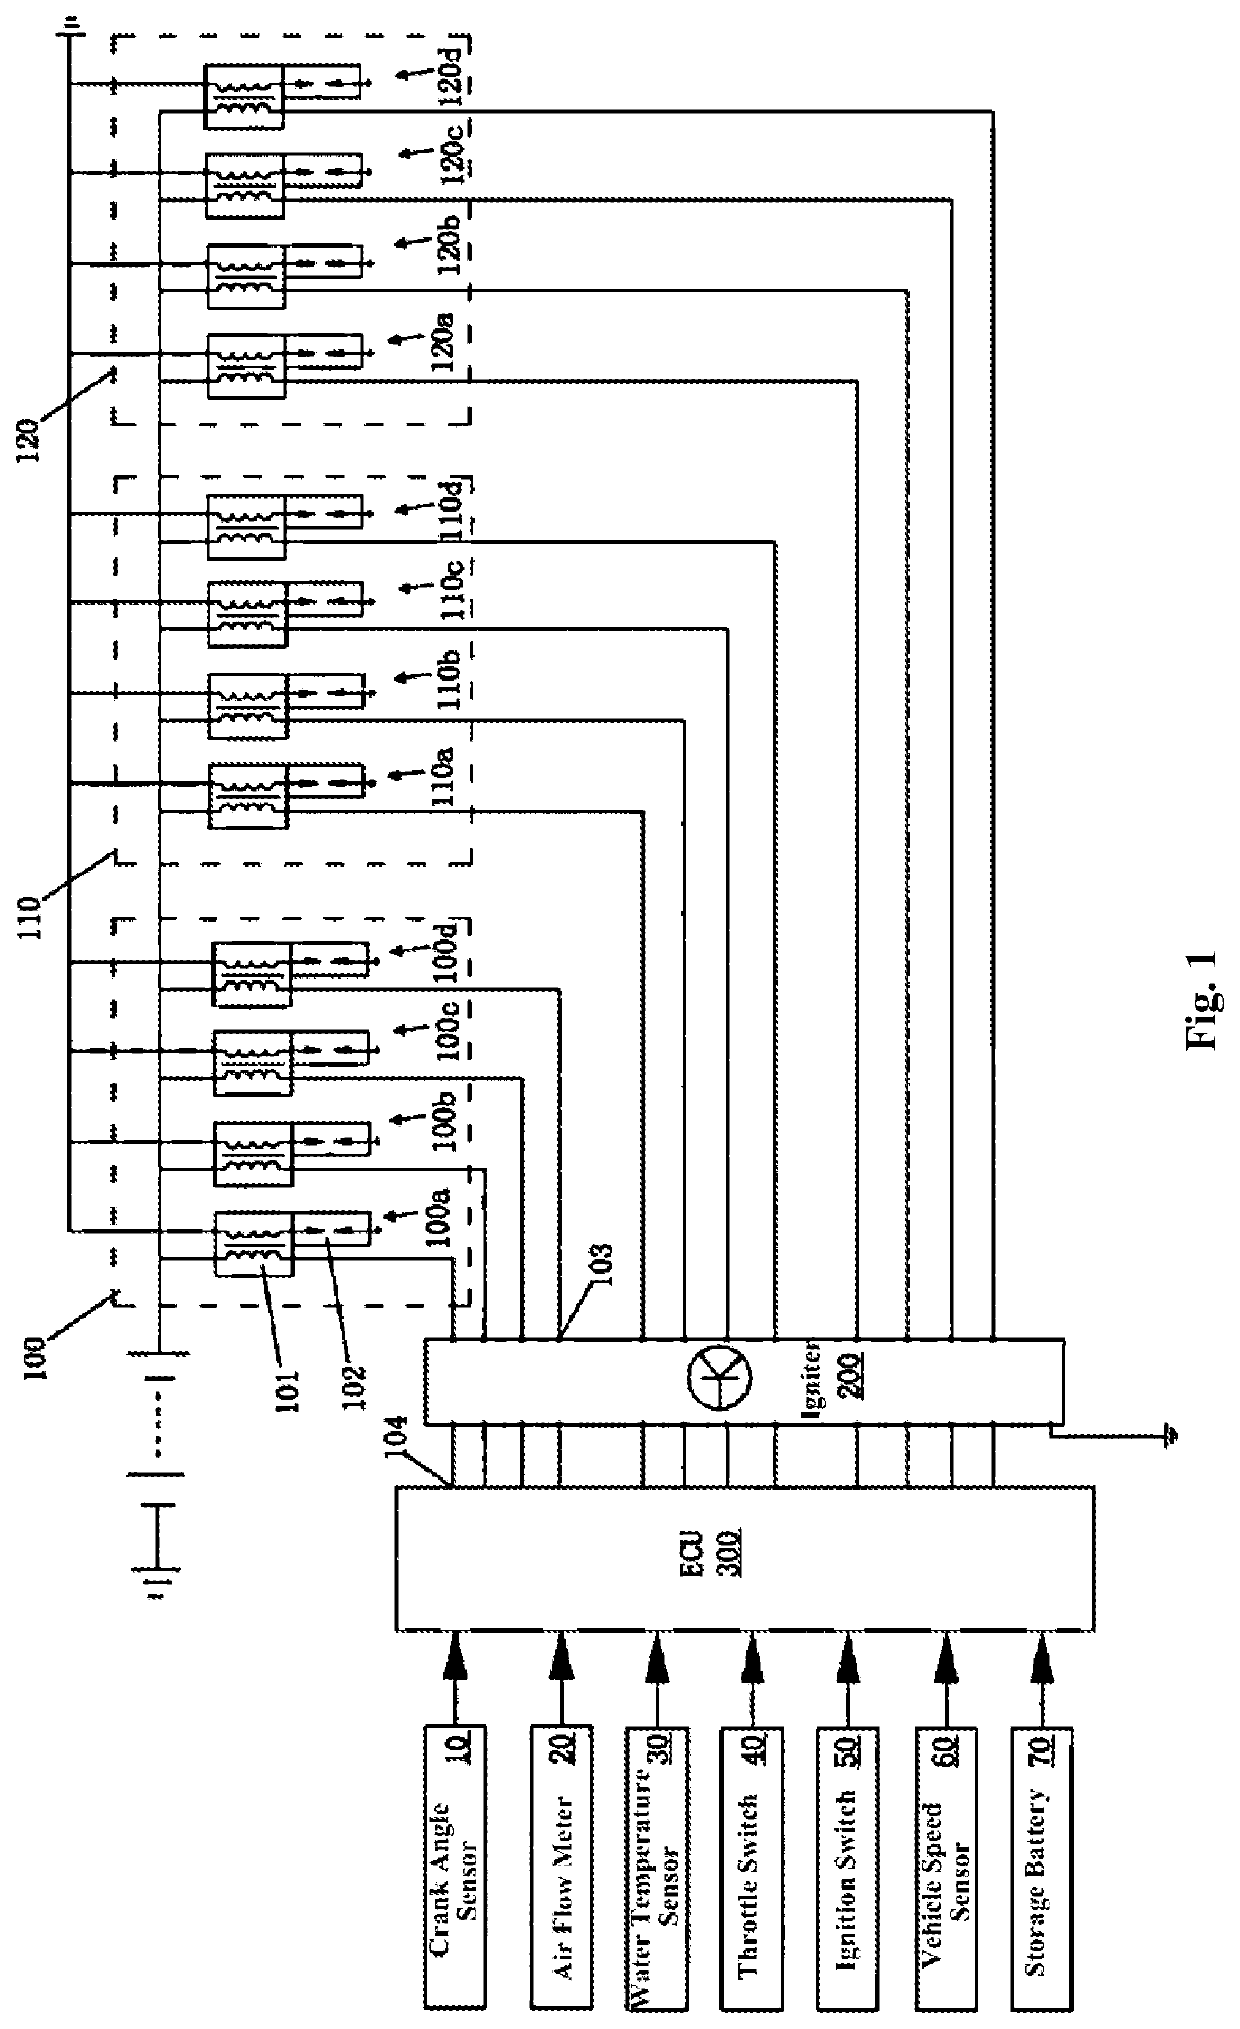 Ignition system for tandem-type hybrid vehicle